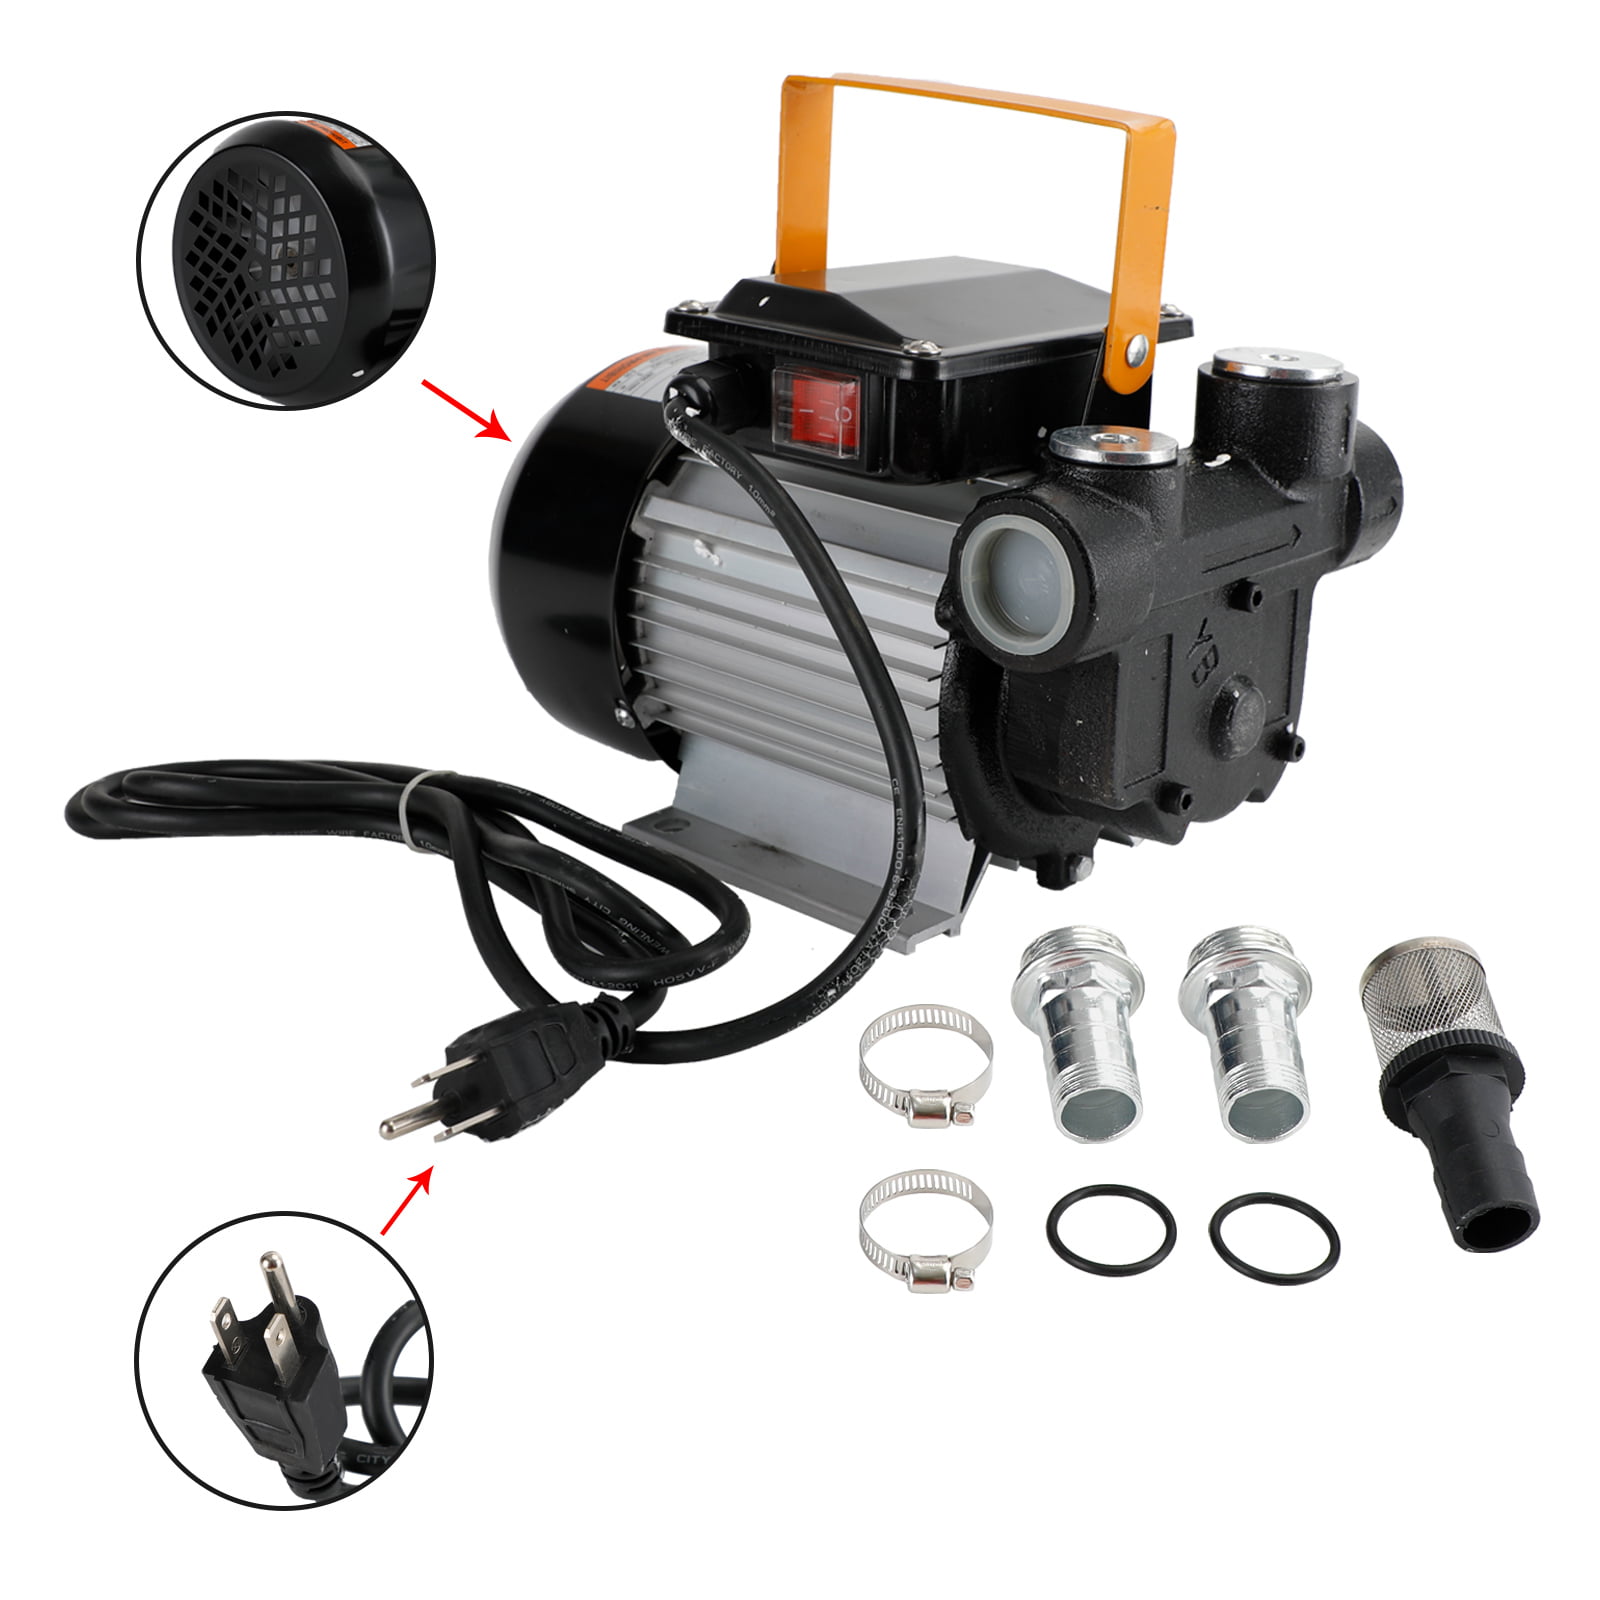 YaoFaFa Diesel Pump 12 V 175 W Oil Extraction Pump Electric Oil Change Pump  Fuel Pump Supports Forward and Reverse Rotation 45 L/min